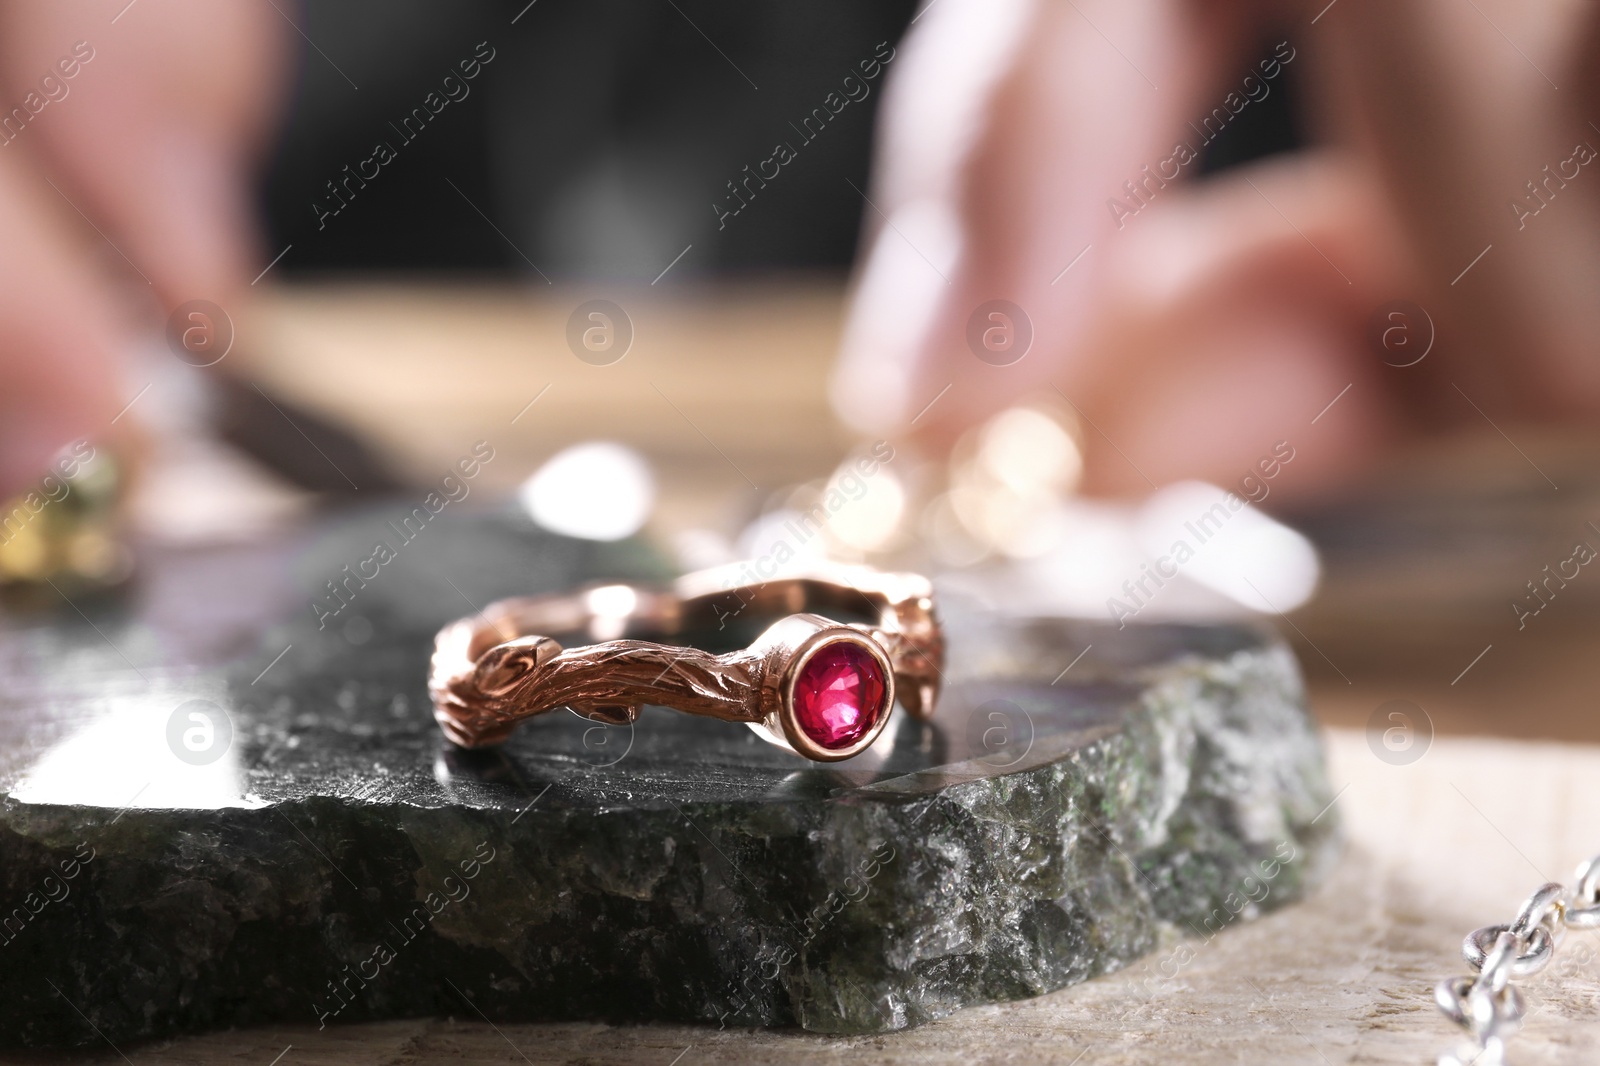 Photo of Ruby ring and blurred jeweler on background